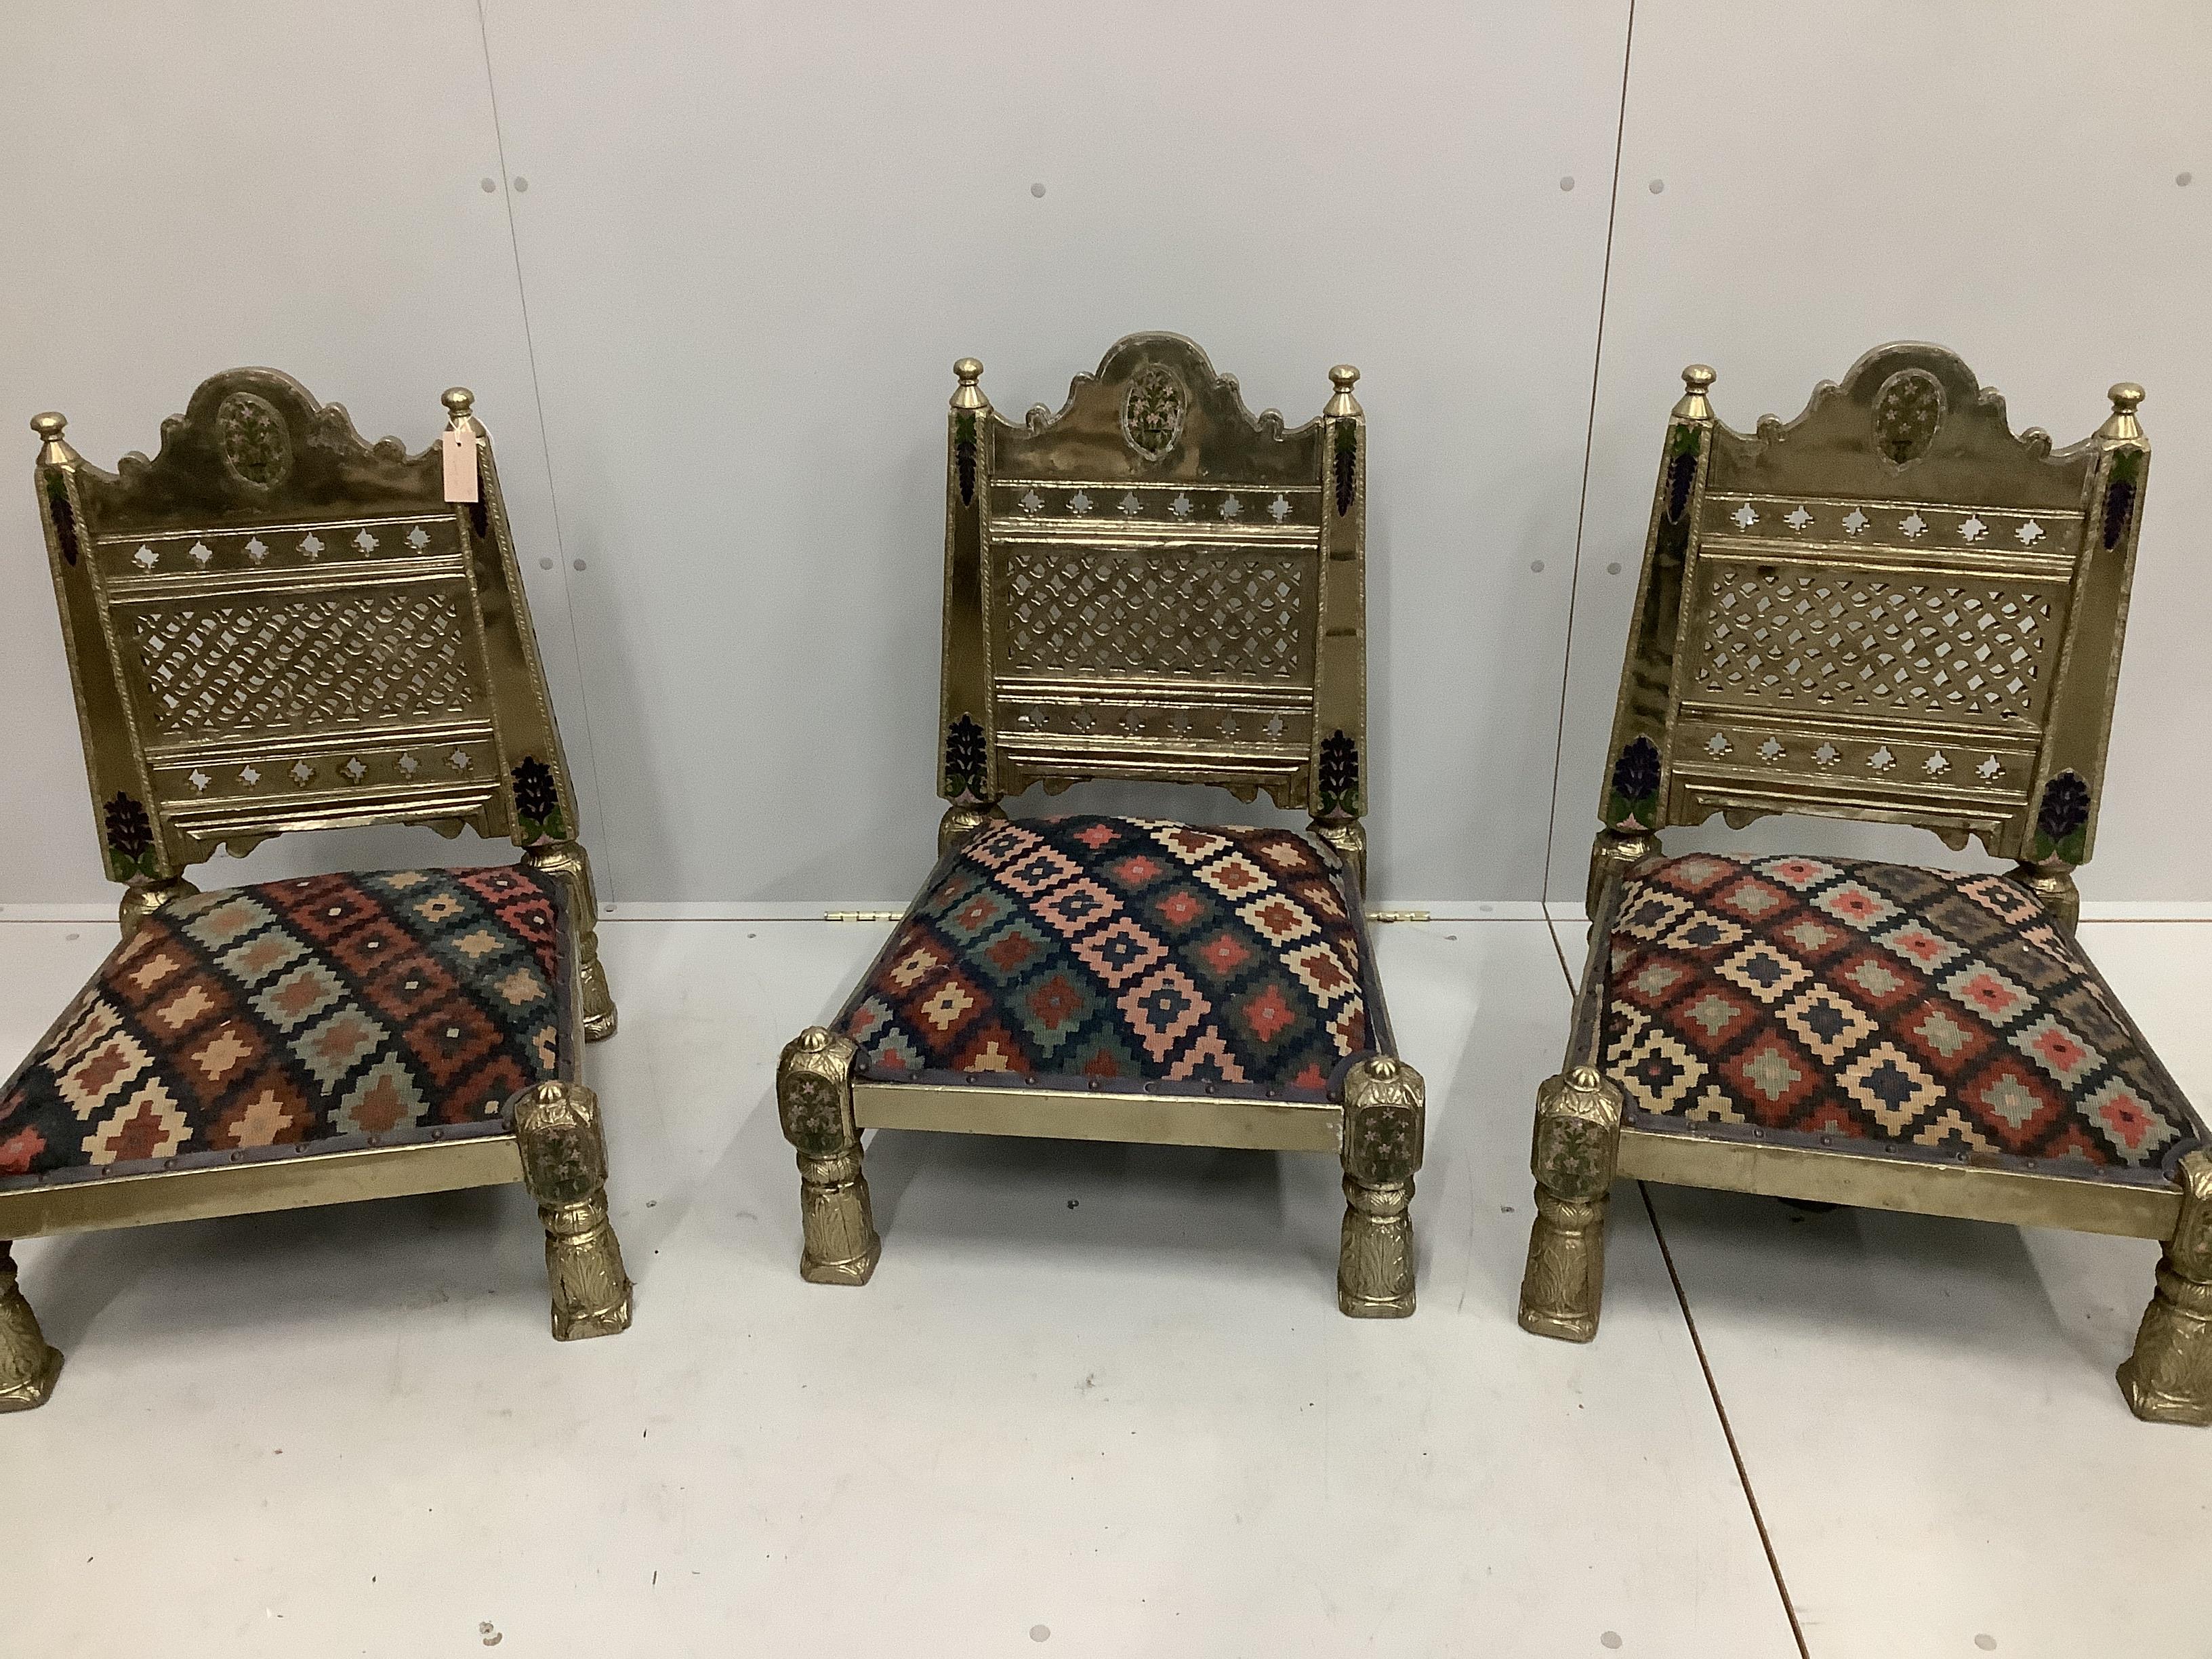 Three Indian metal clad Pidha low chairs with enamelled decoration and Kilim covered seats, width 58cm, depth 55cm, height 75cm                                                                                             